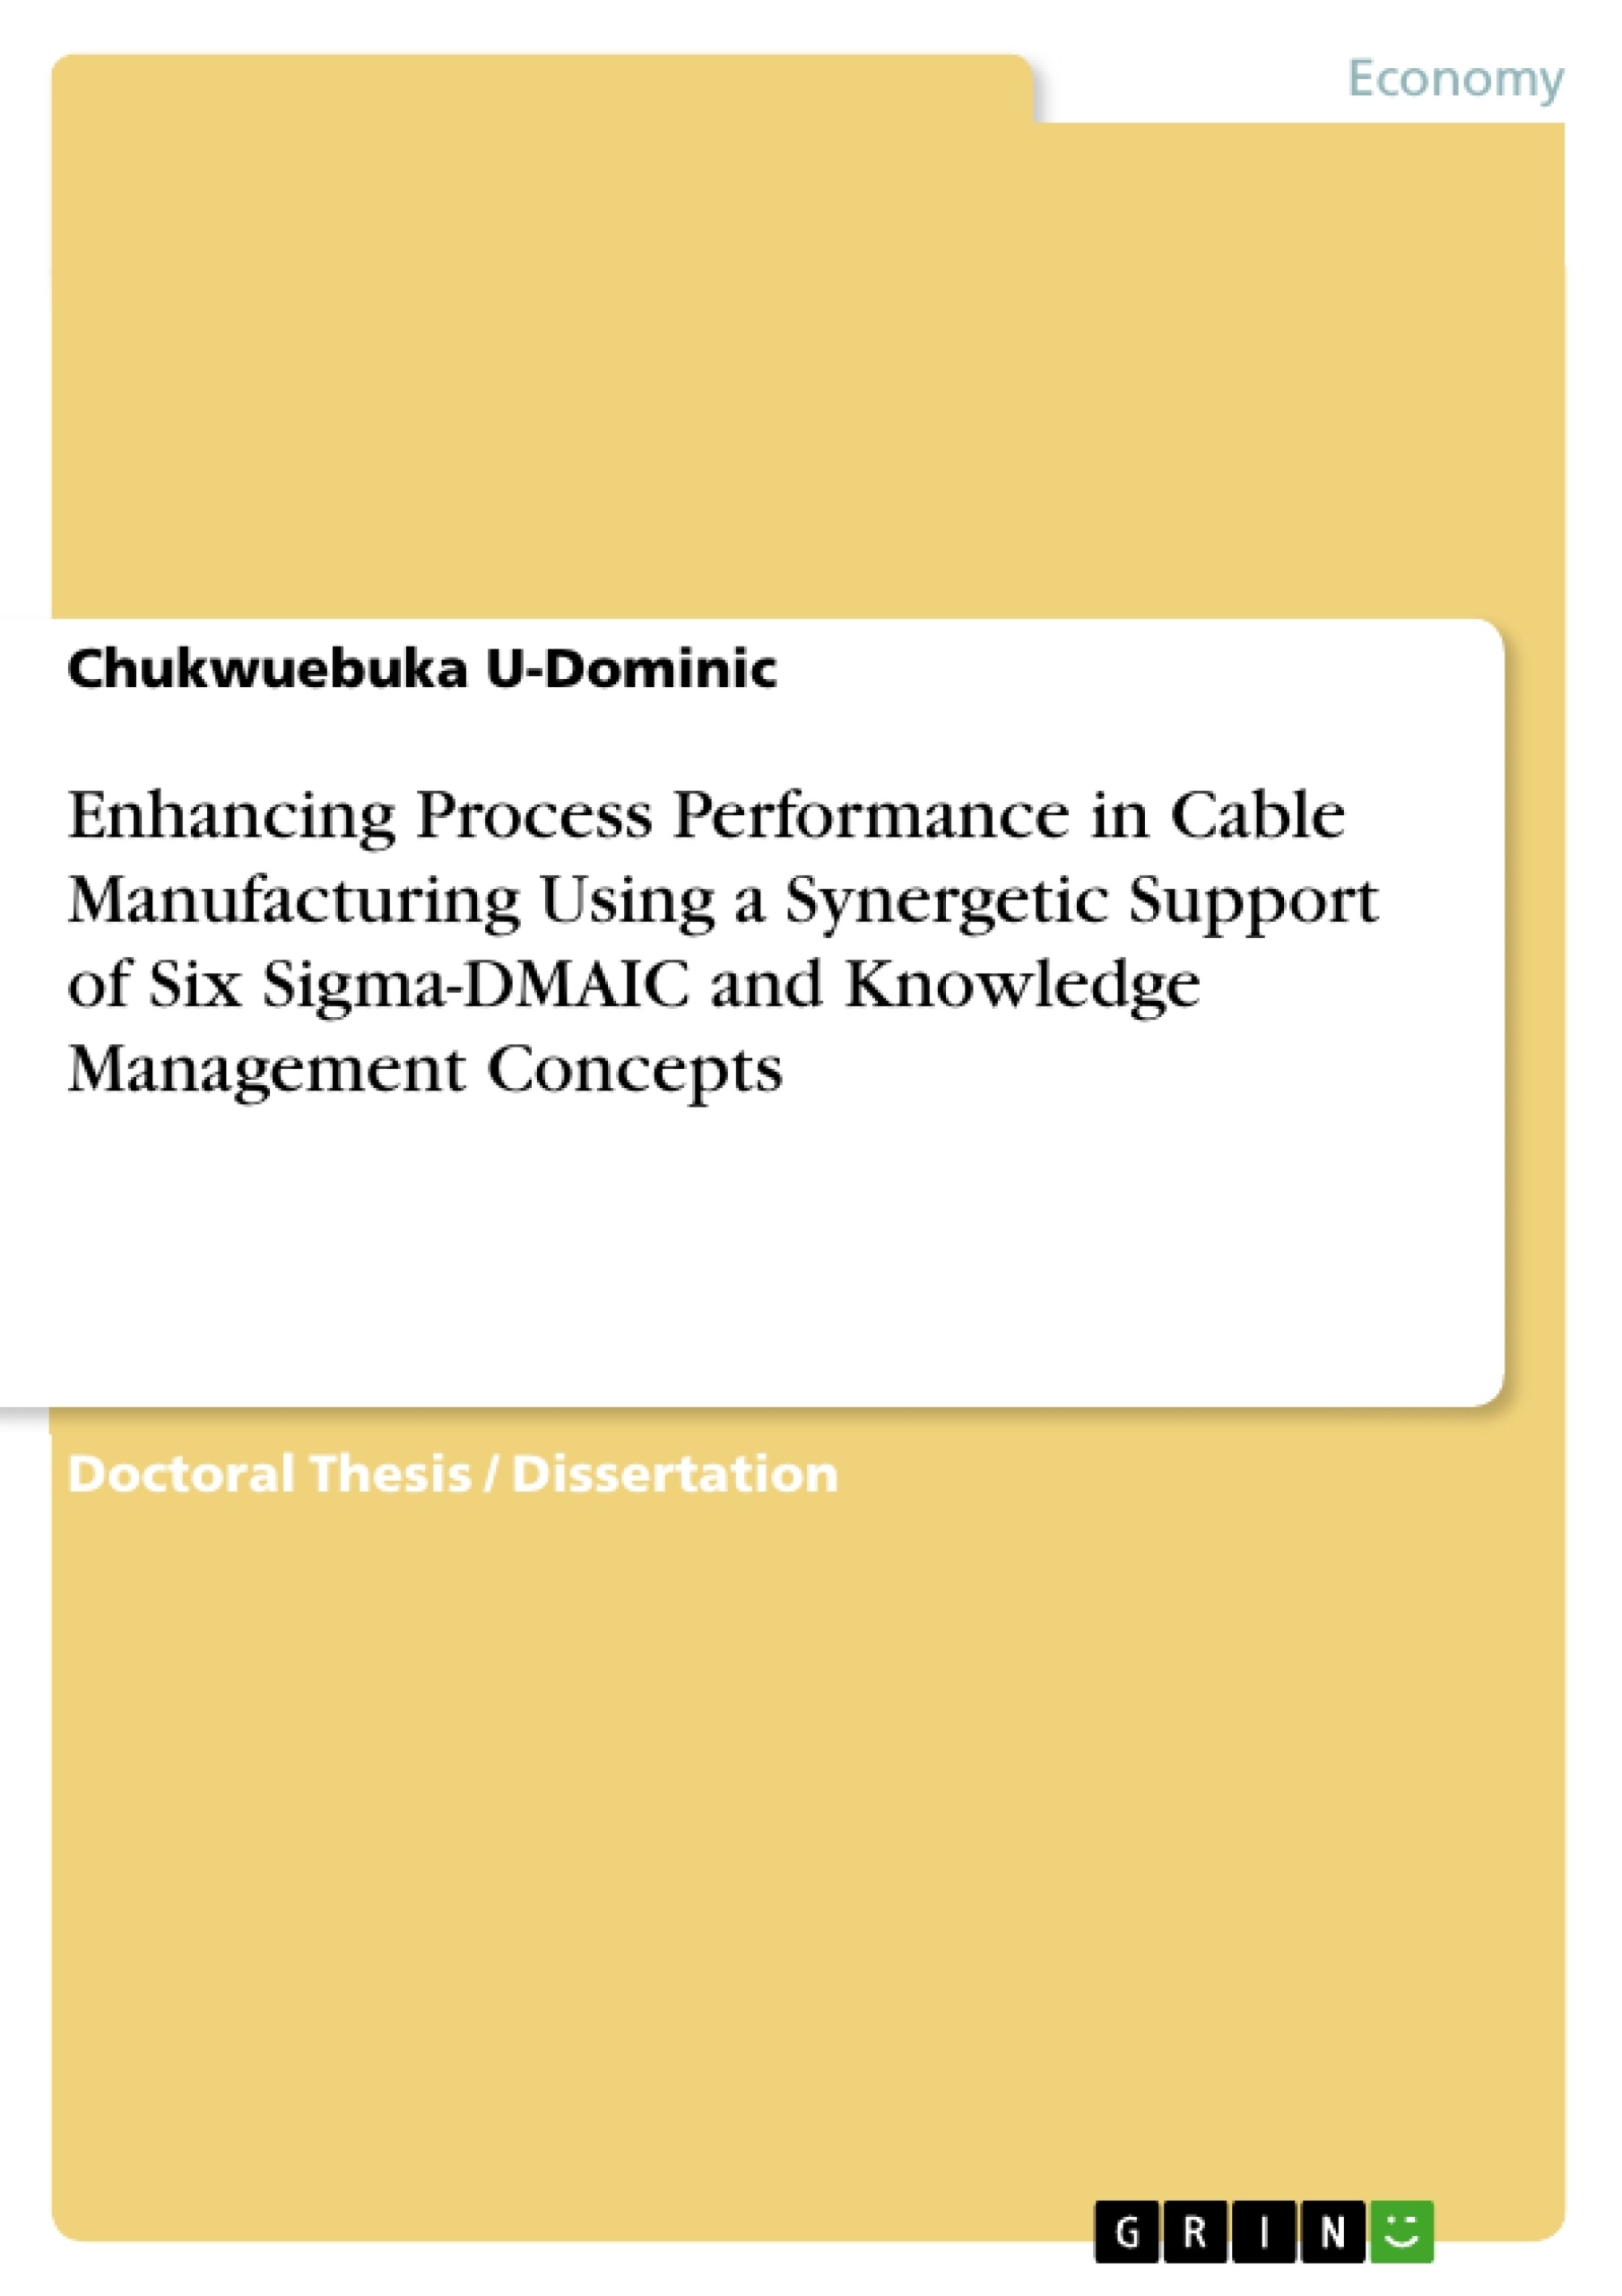 Title: Enhancing Process Performance in Cable Manufacturing Using a Synergetic Support of Six Sigma-DMAIC and Knowledge Management Concepts